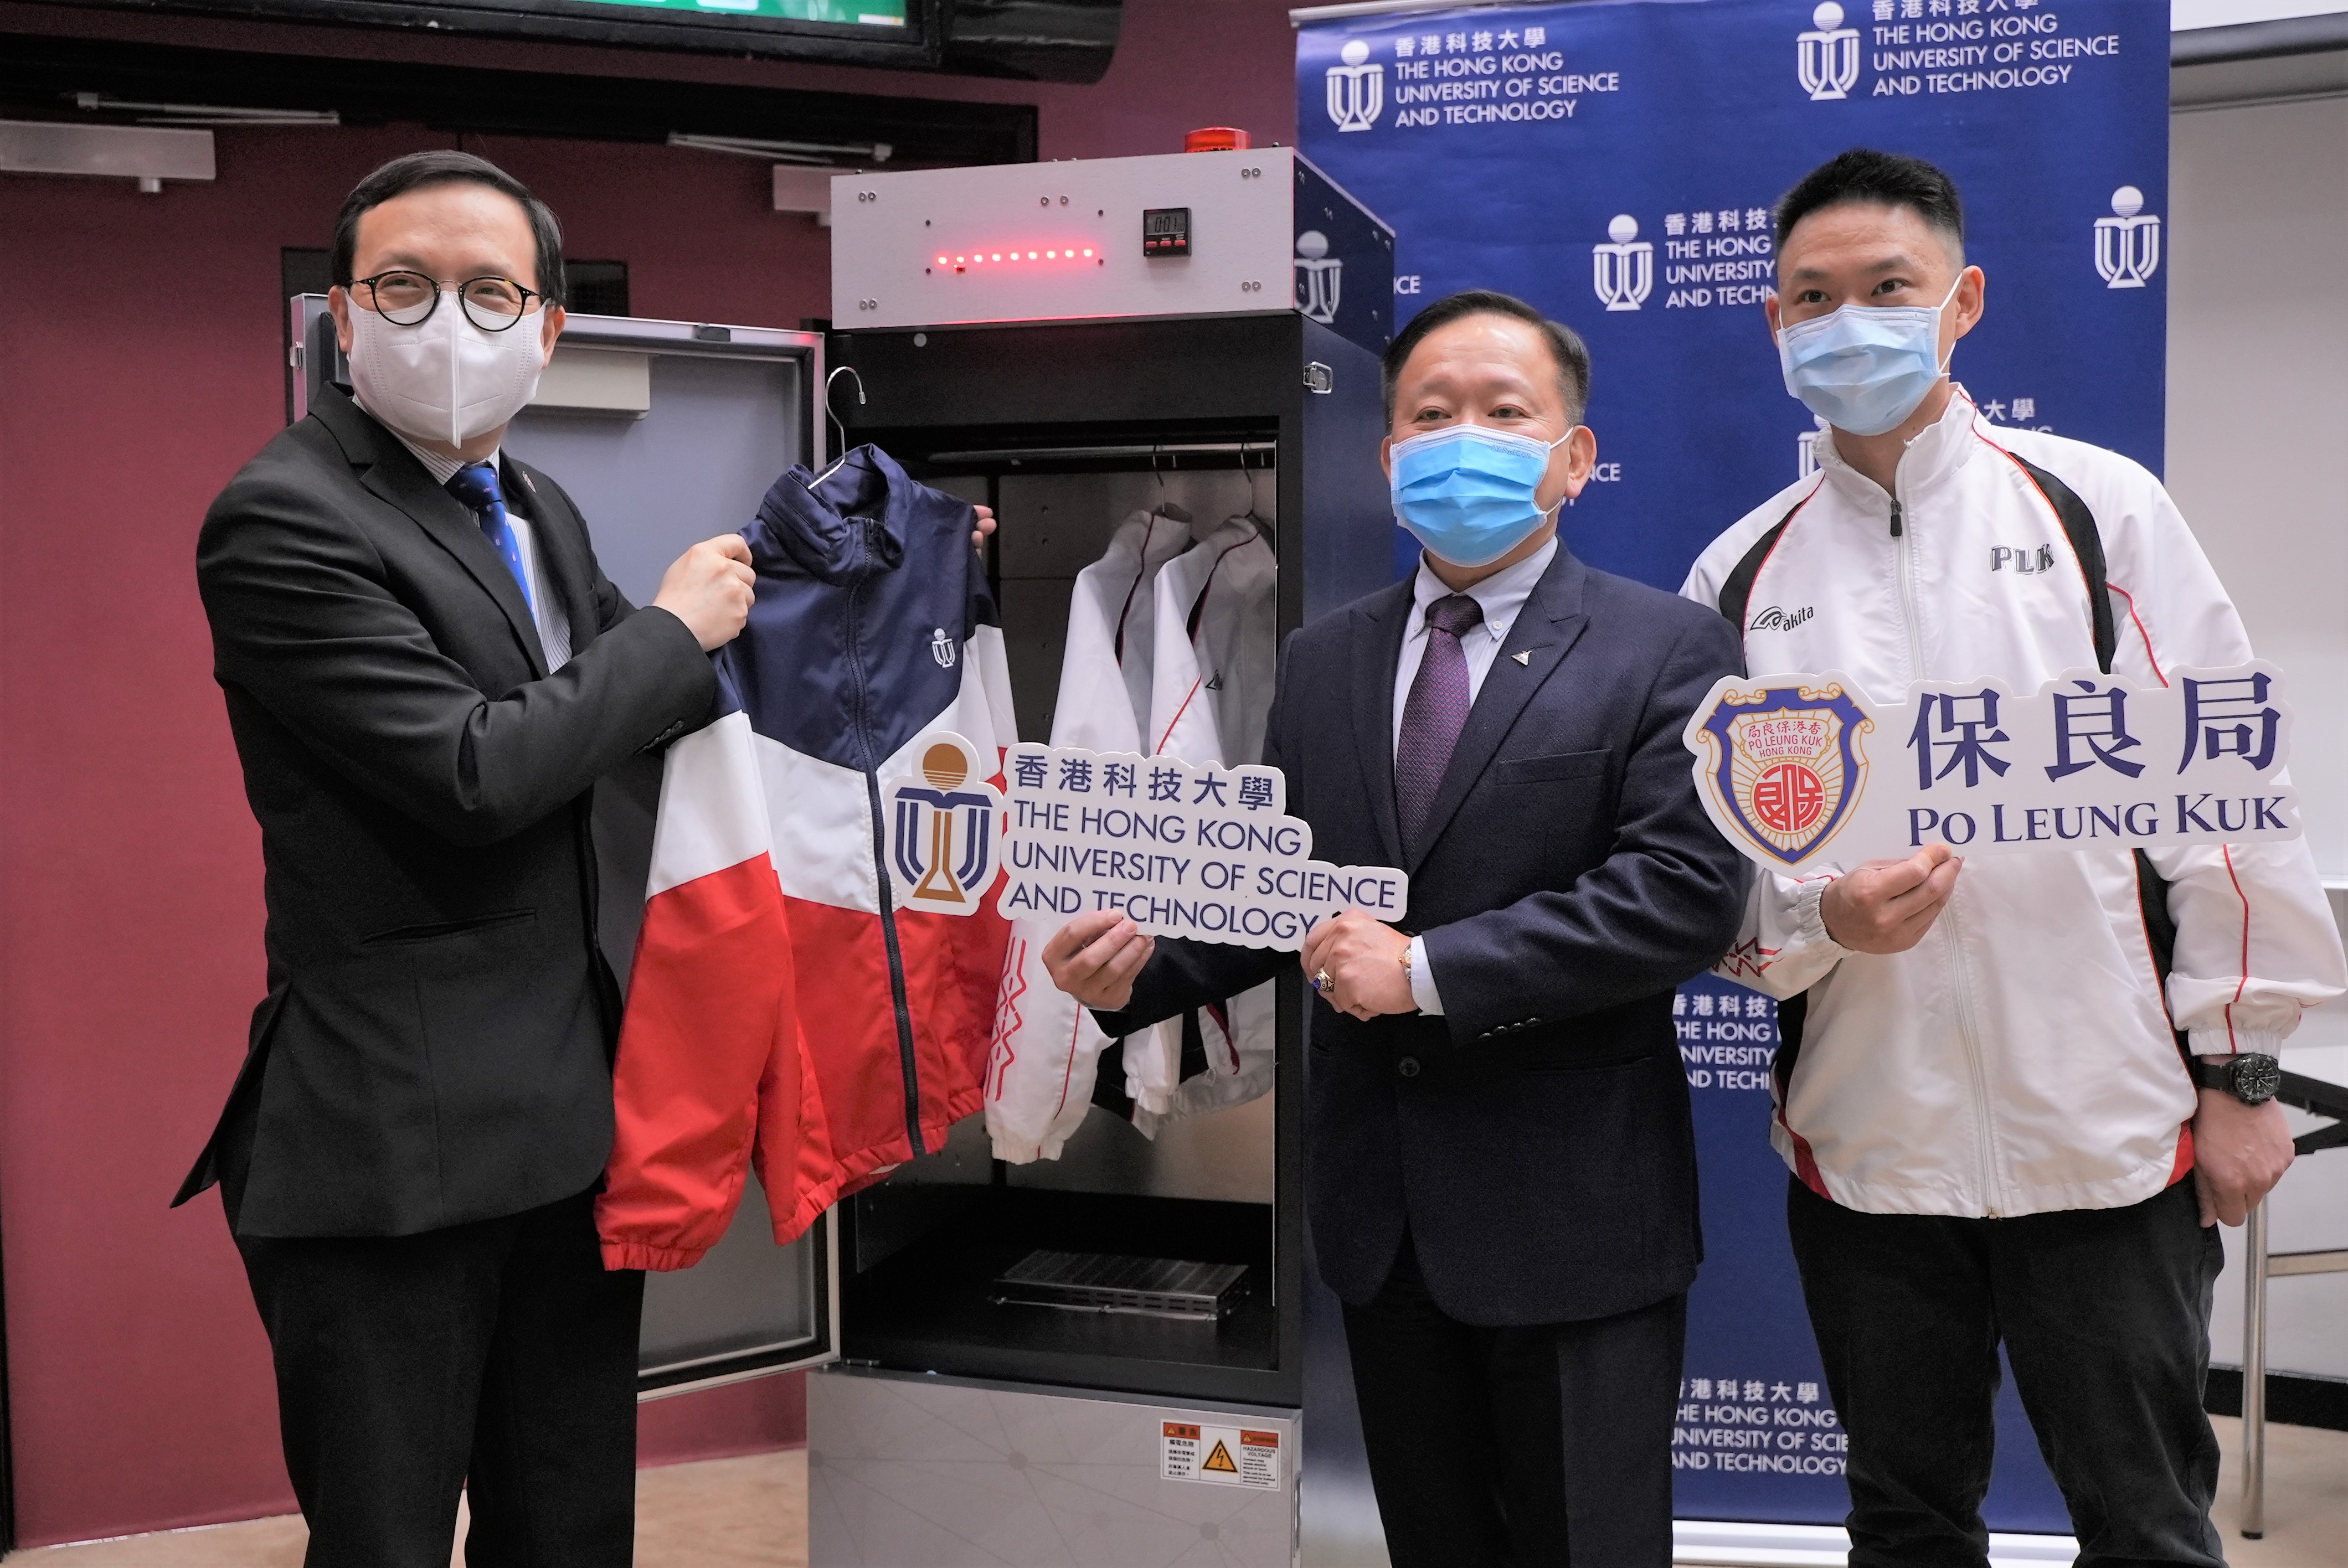 Prof. Ricky LEE Shi-Wei (middle), Chair Professor of the Department of Mechanical and Aerospace Engineering at HKUST demonstrates how the UVC LED disinfection closet works, along with Mr. LAM Kwok Wai (left) and Mr. Martin MAK, Principal and Assistant Warden respectively of the Po Leung Kuk Yu Lee Mo Fan Memorial School.